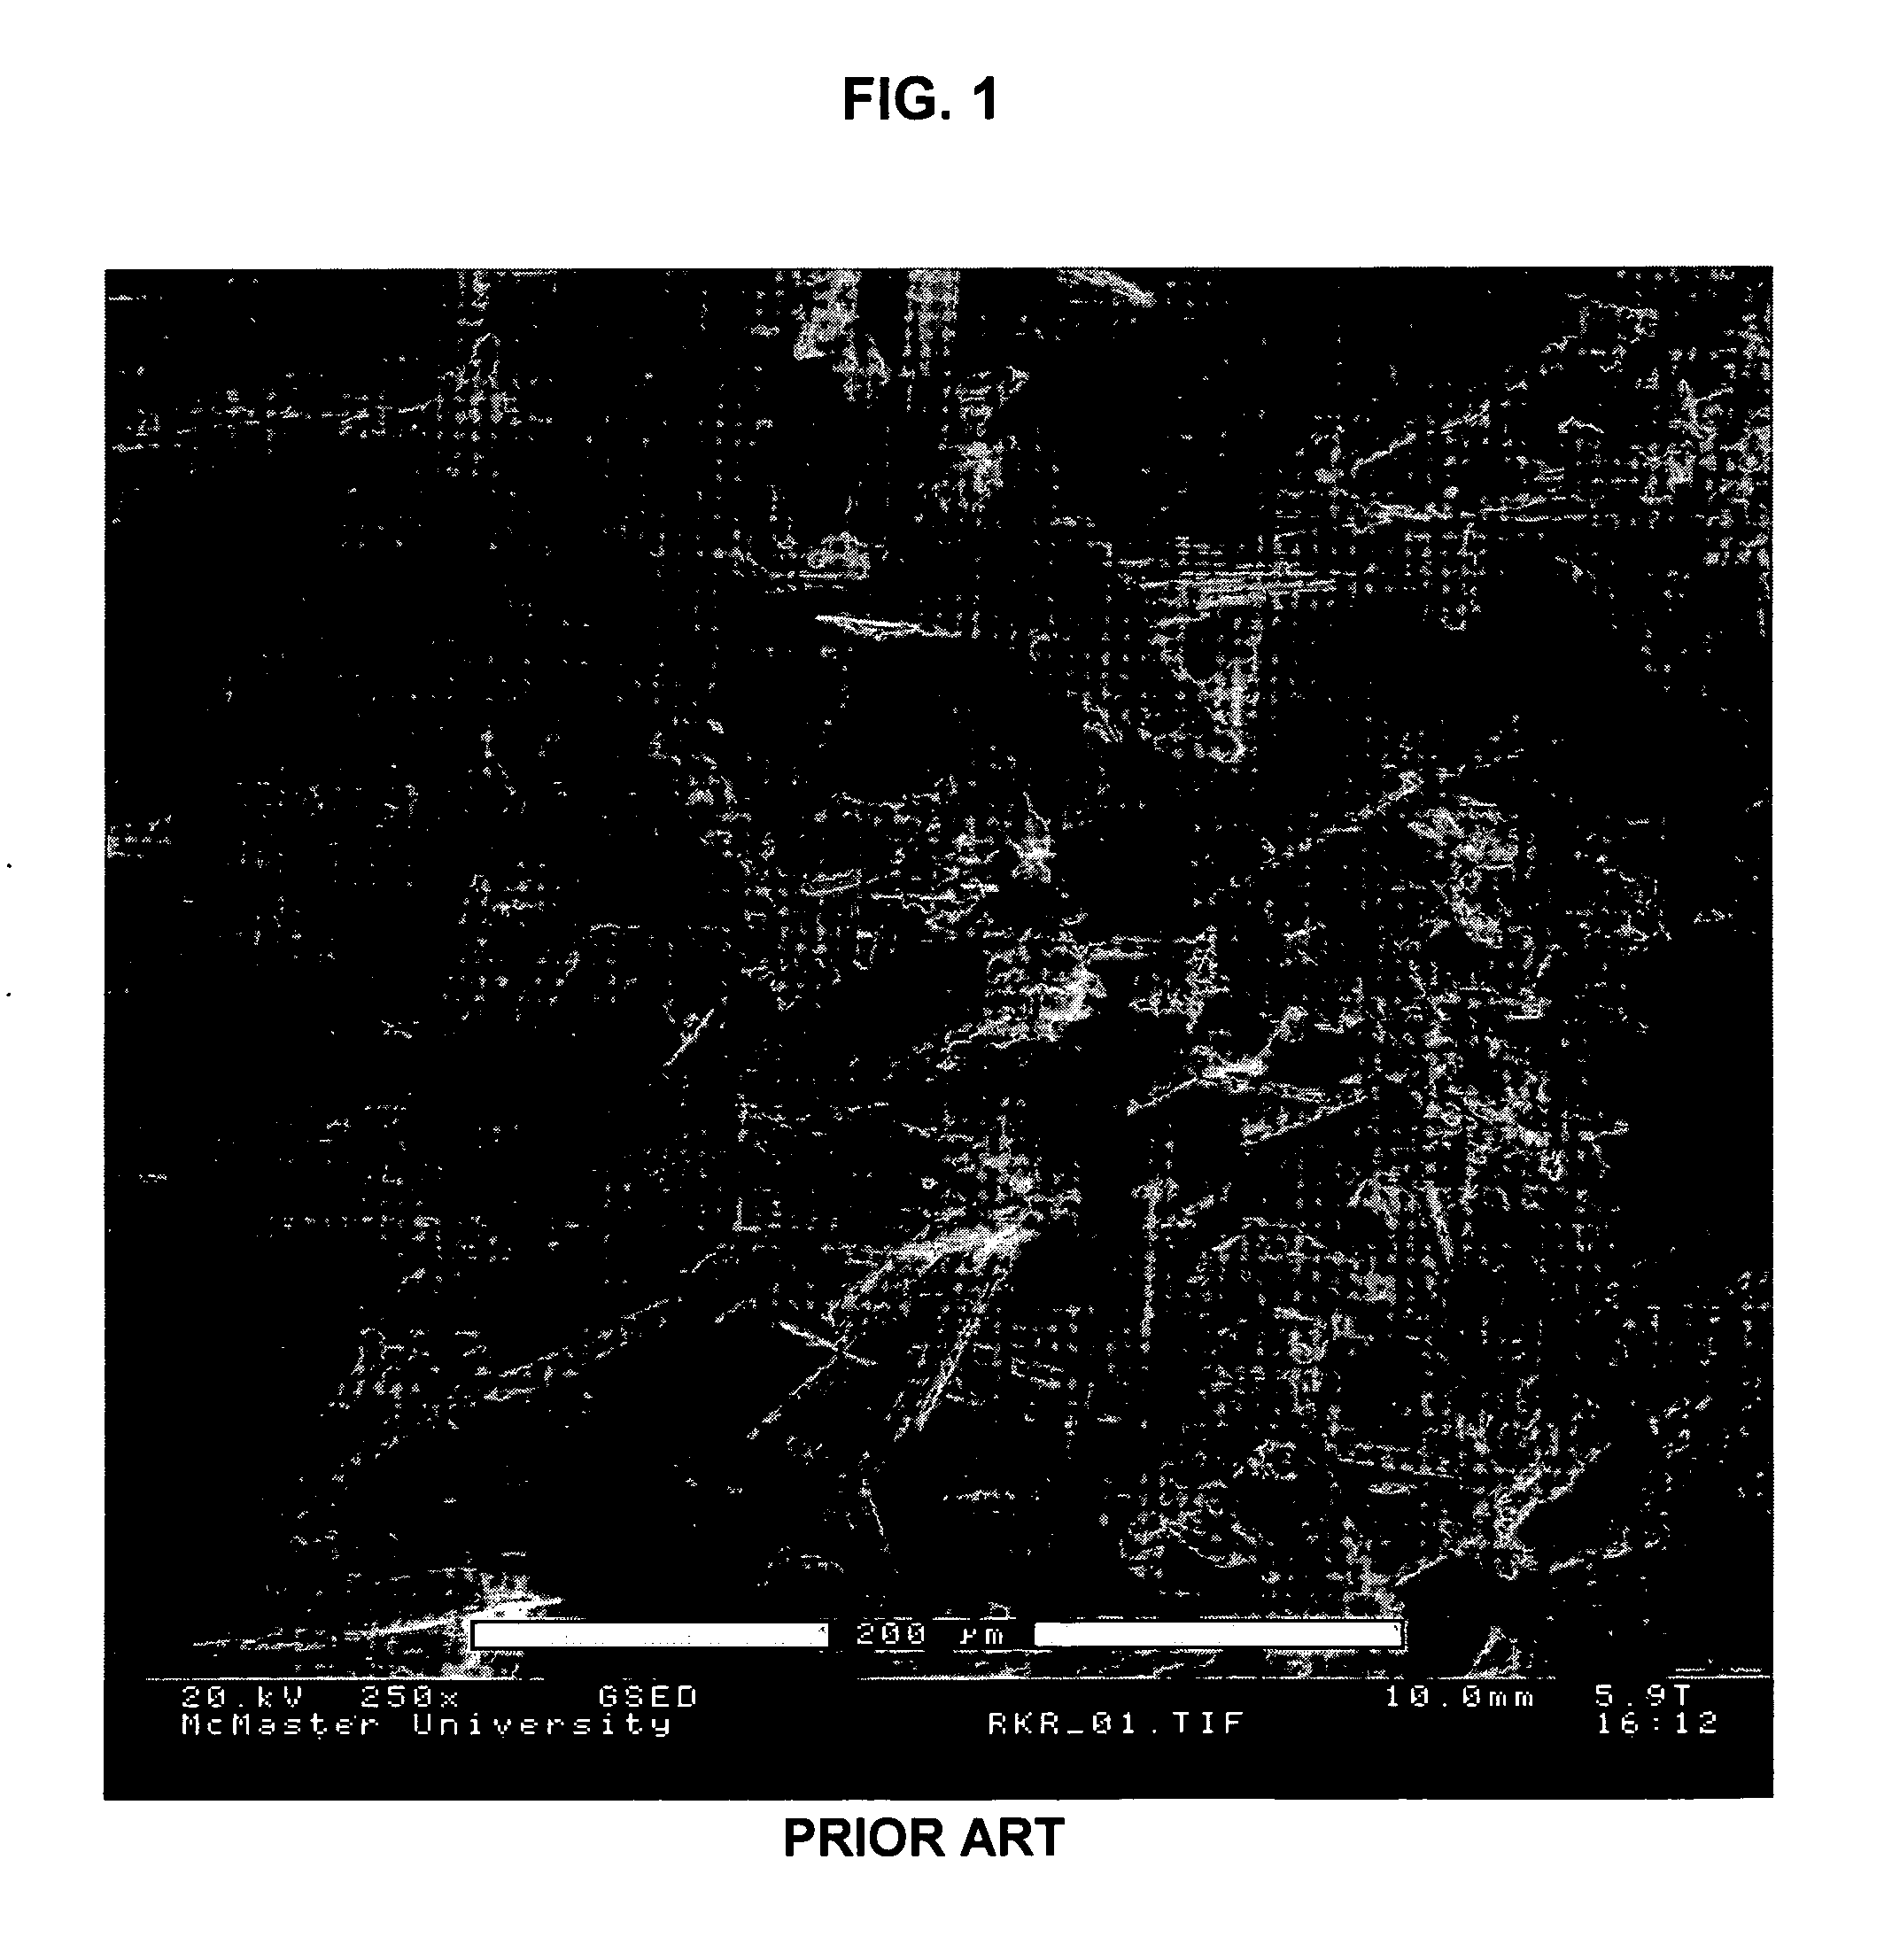 Alpha-type calcium sulfate hemihydrate compositions and methods of making same